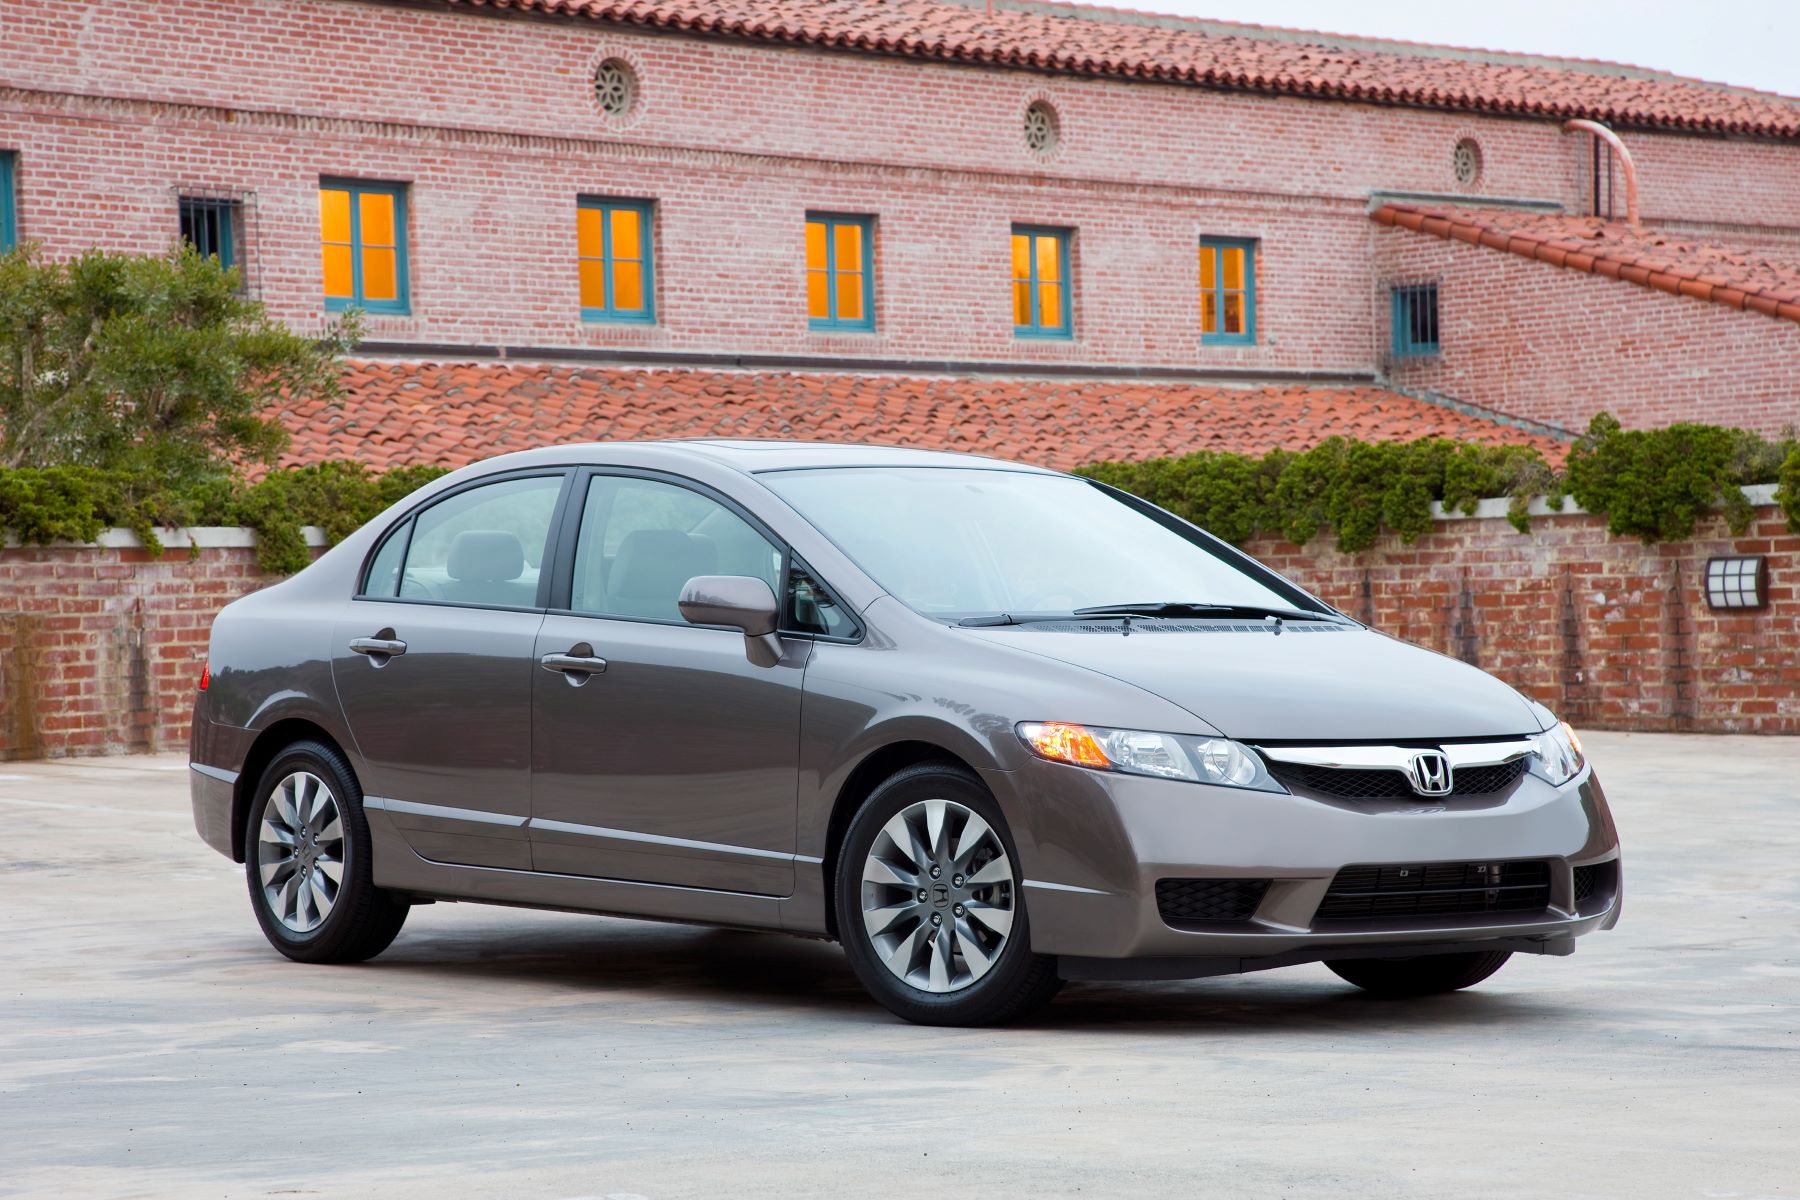 2009 Honda Civic: Everything You Need to Know About Buying This Used Honda